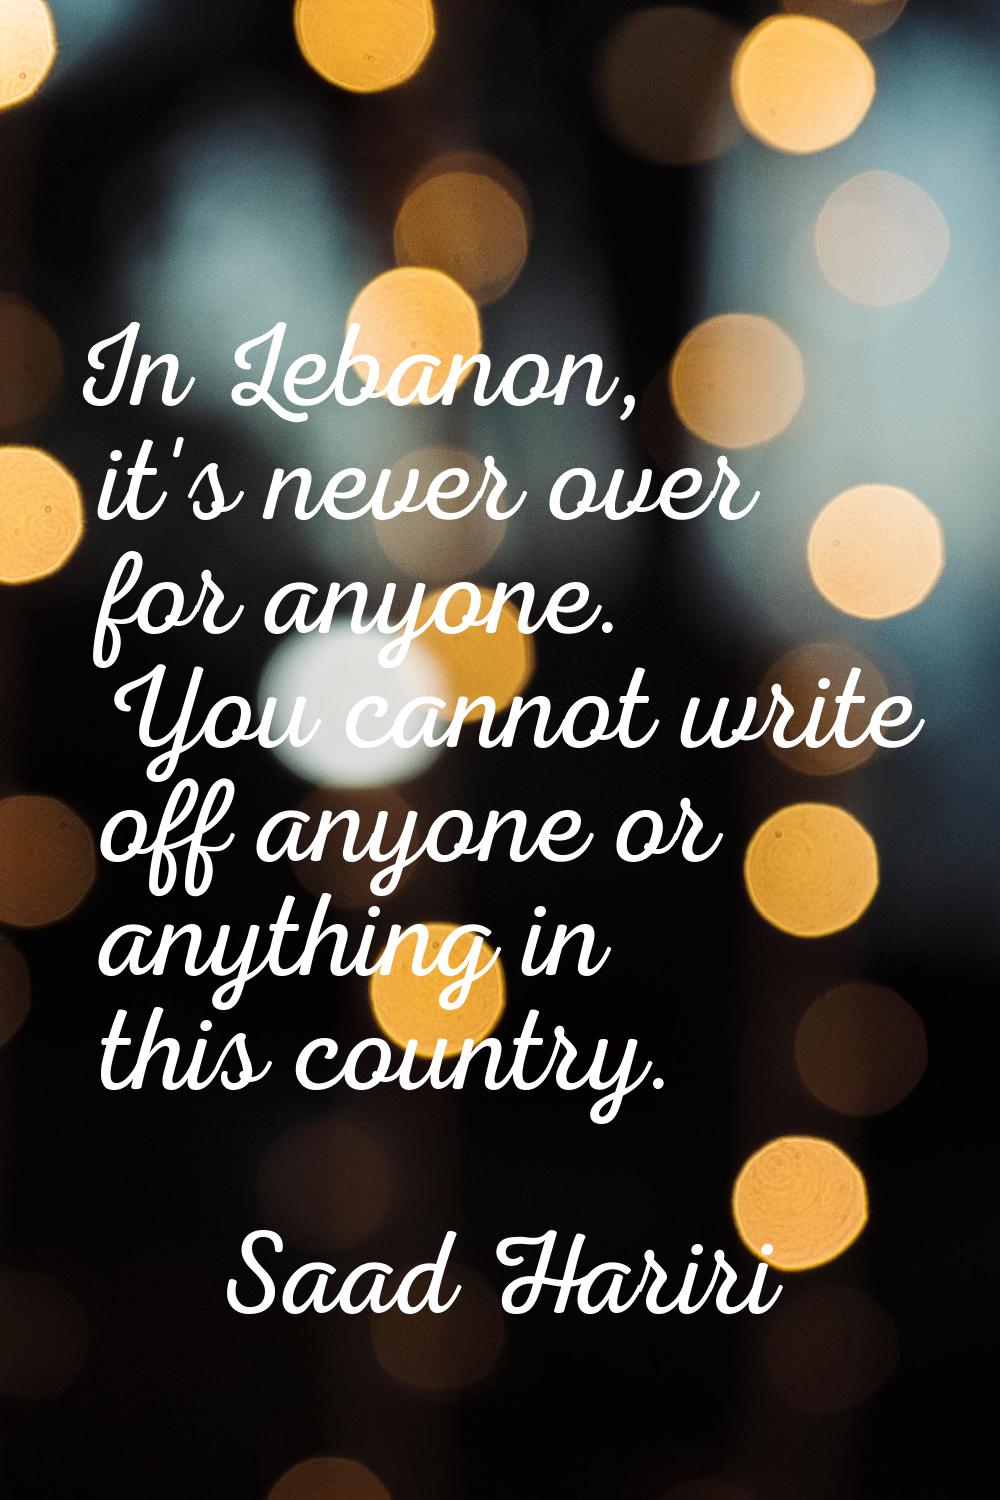 In Lebanon, it's never over for anyone. You cannot write off anyone or anything in this country.